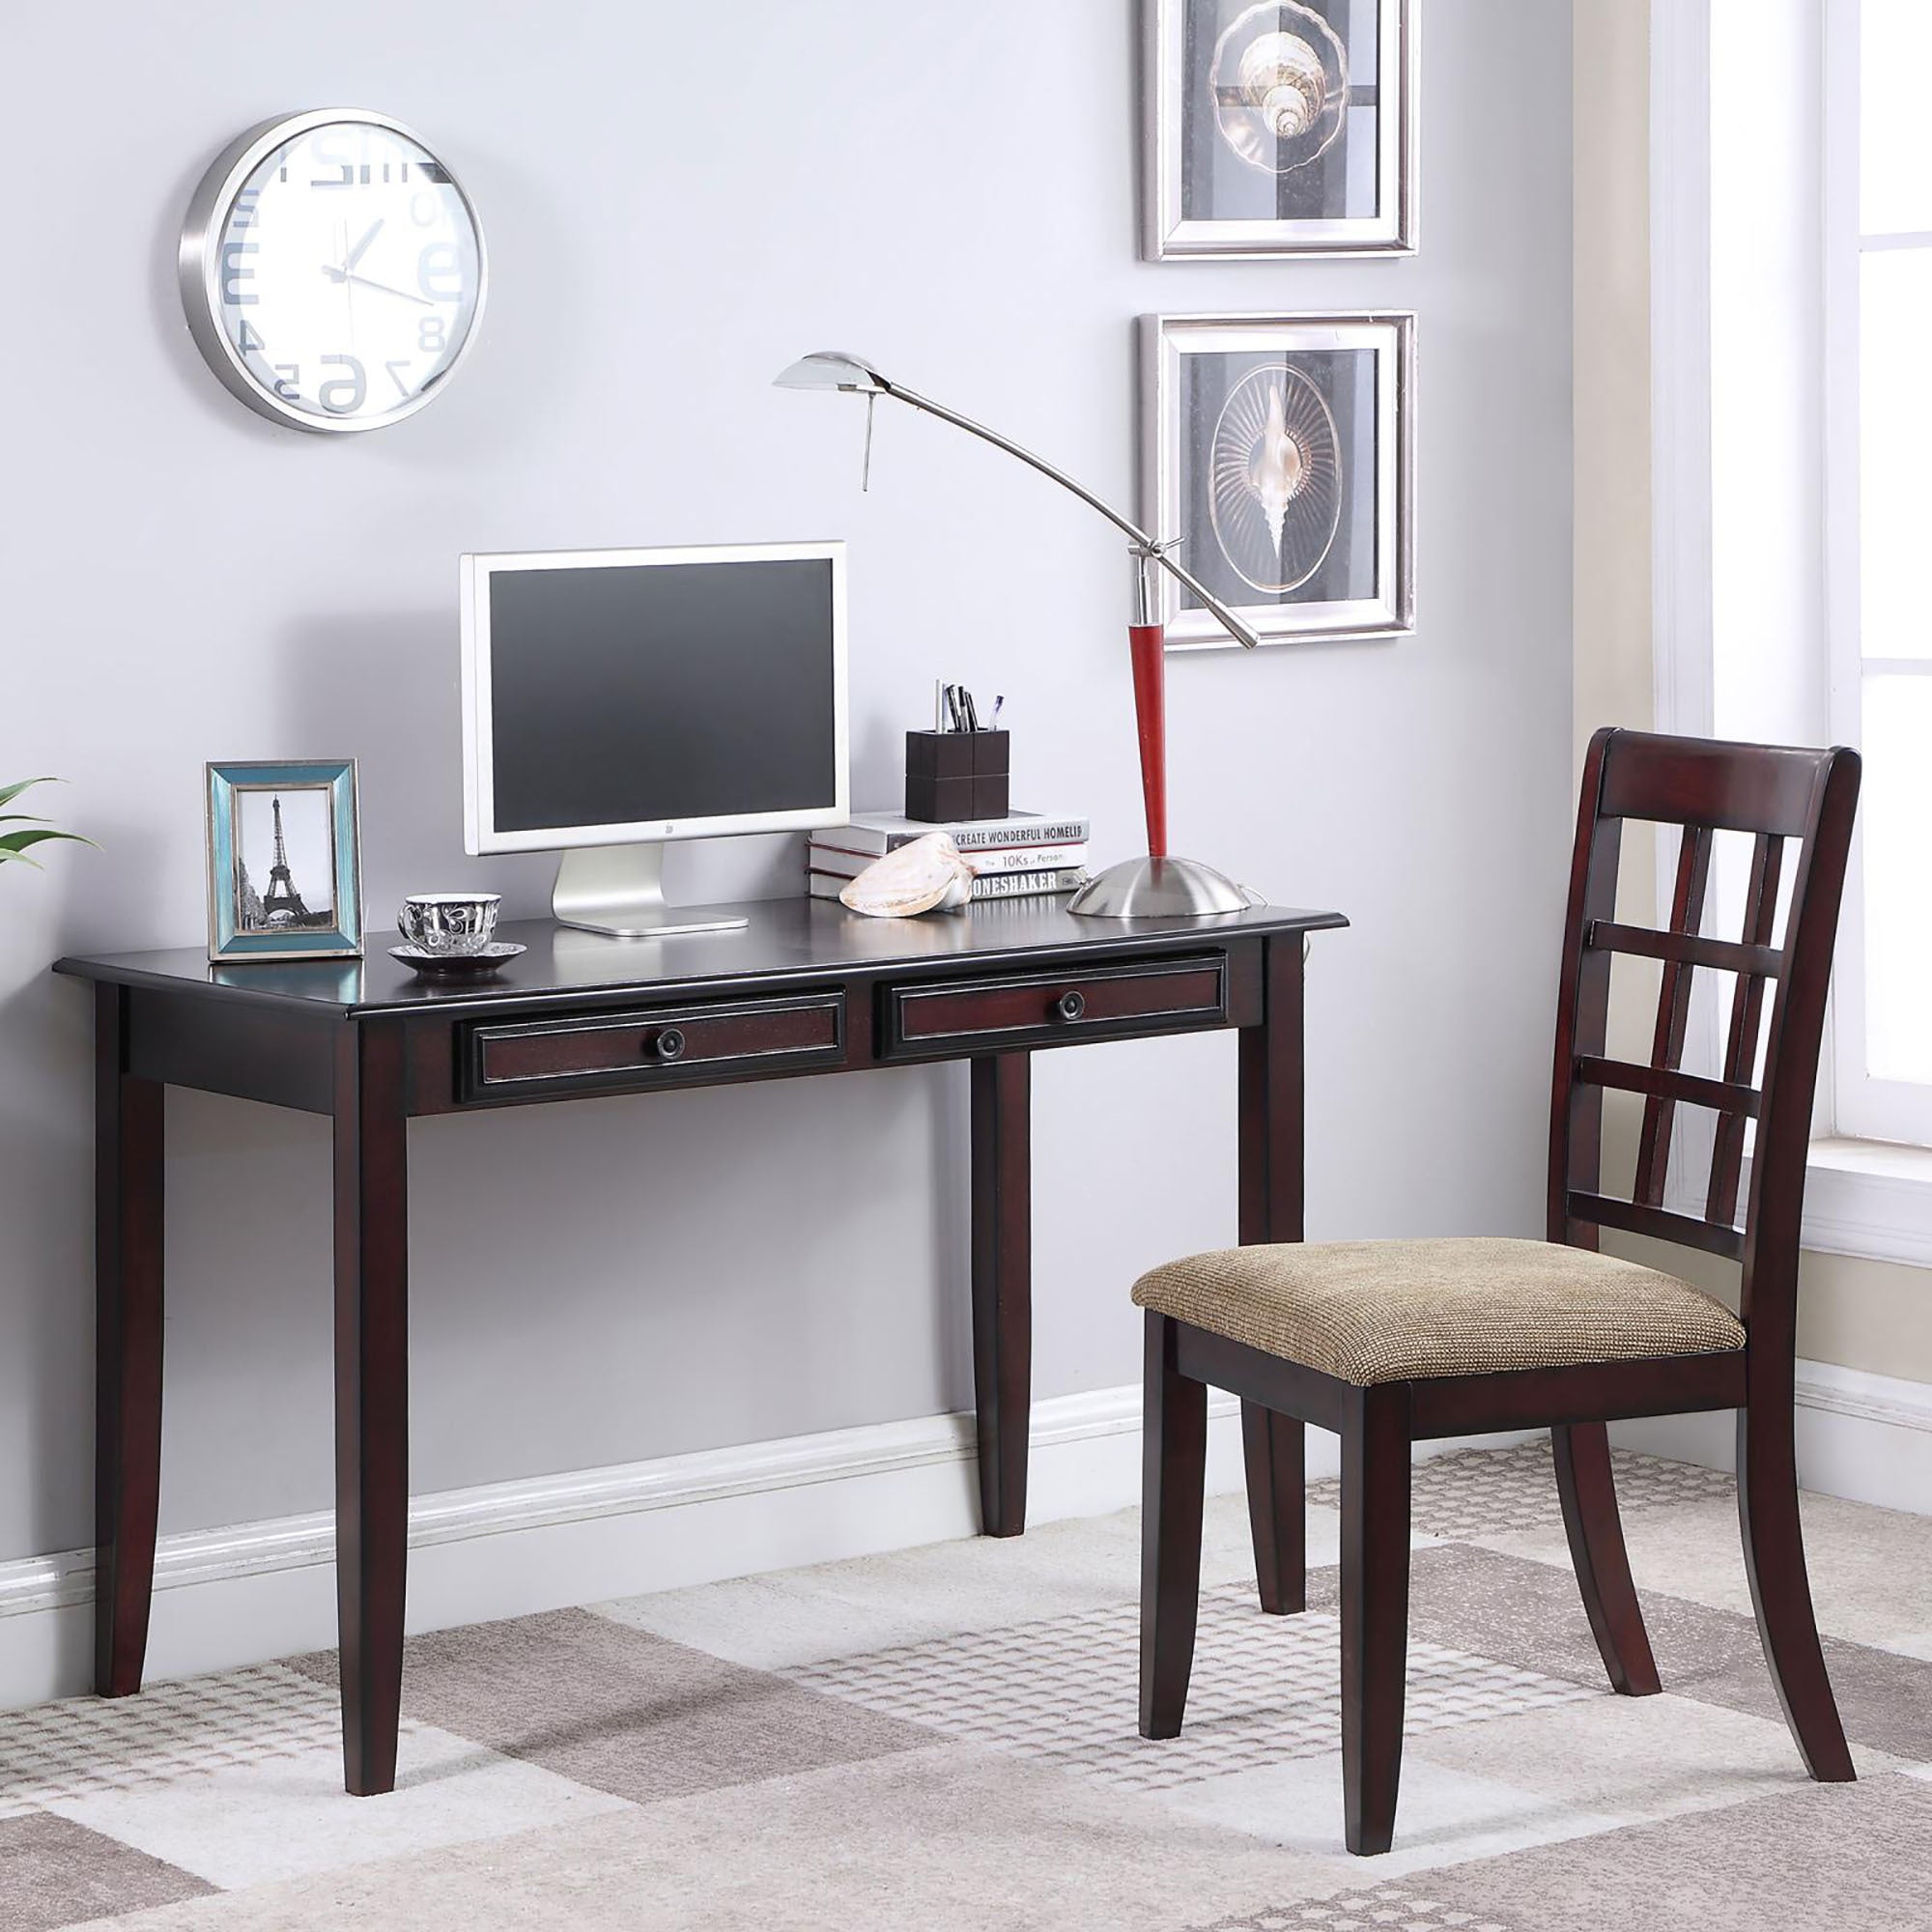 Dark Amber and Tan 2 Piece Writing Desk Set with